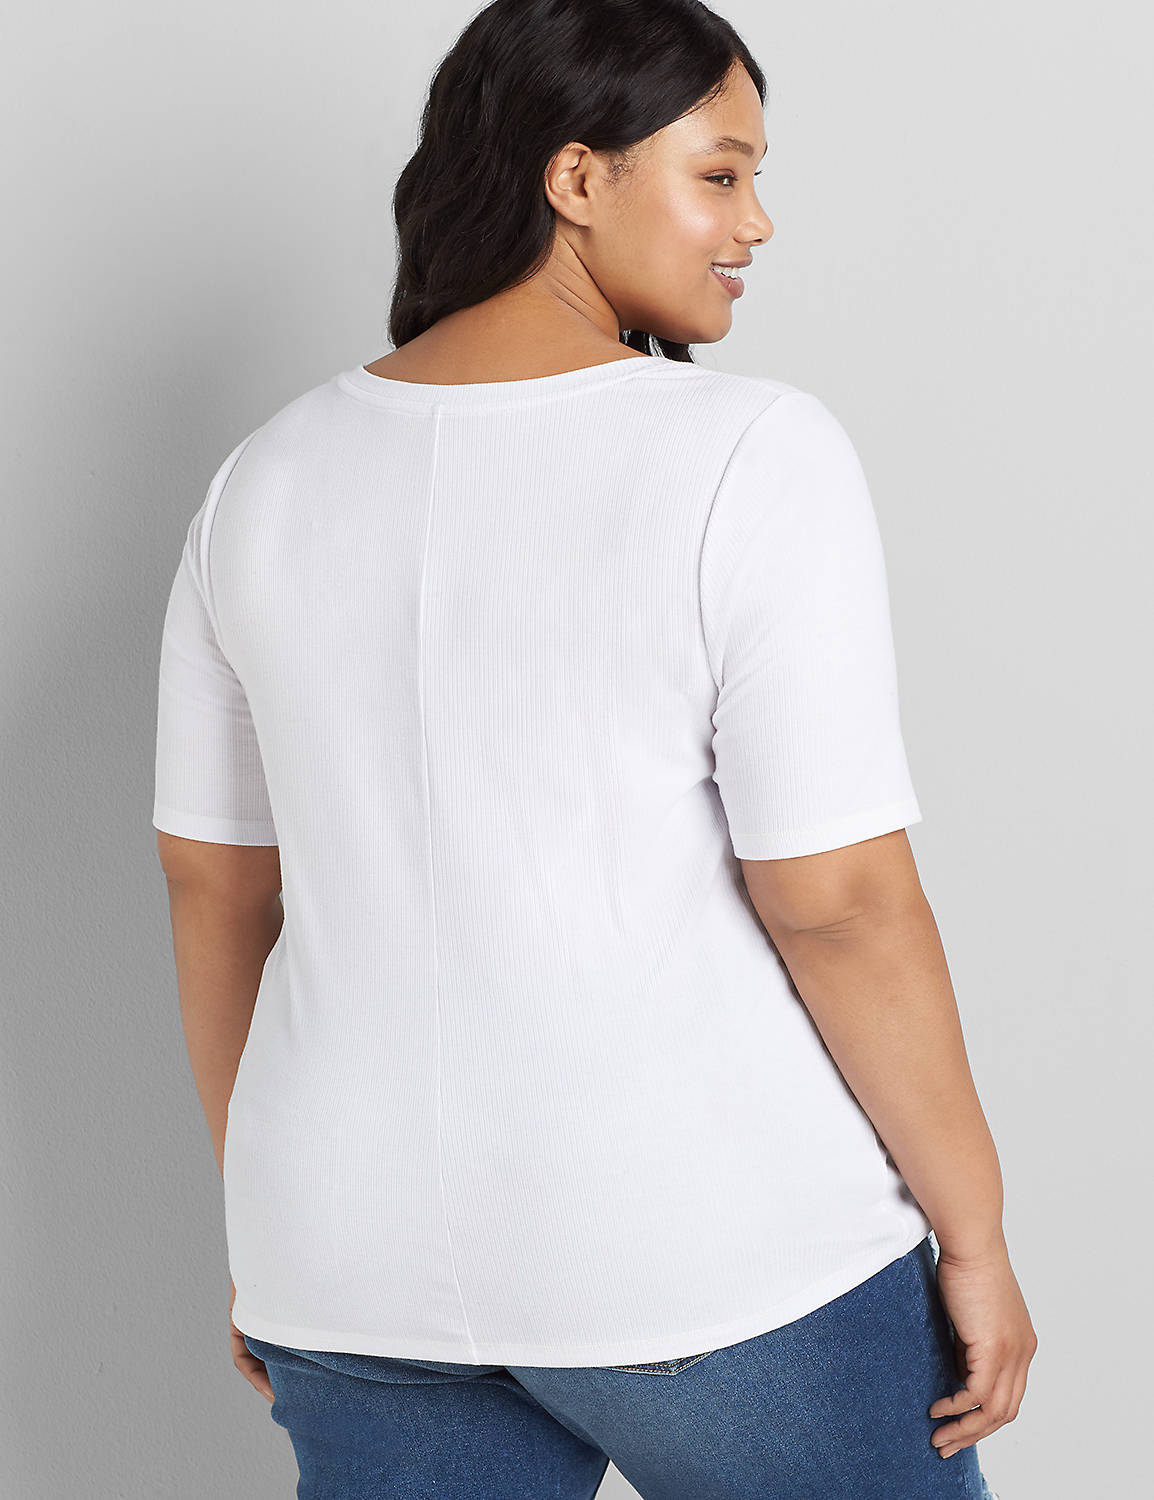 Perfect Sleeve Ribbed Top With Buttons Product Image 2